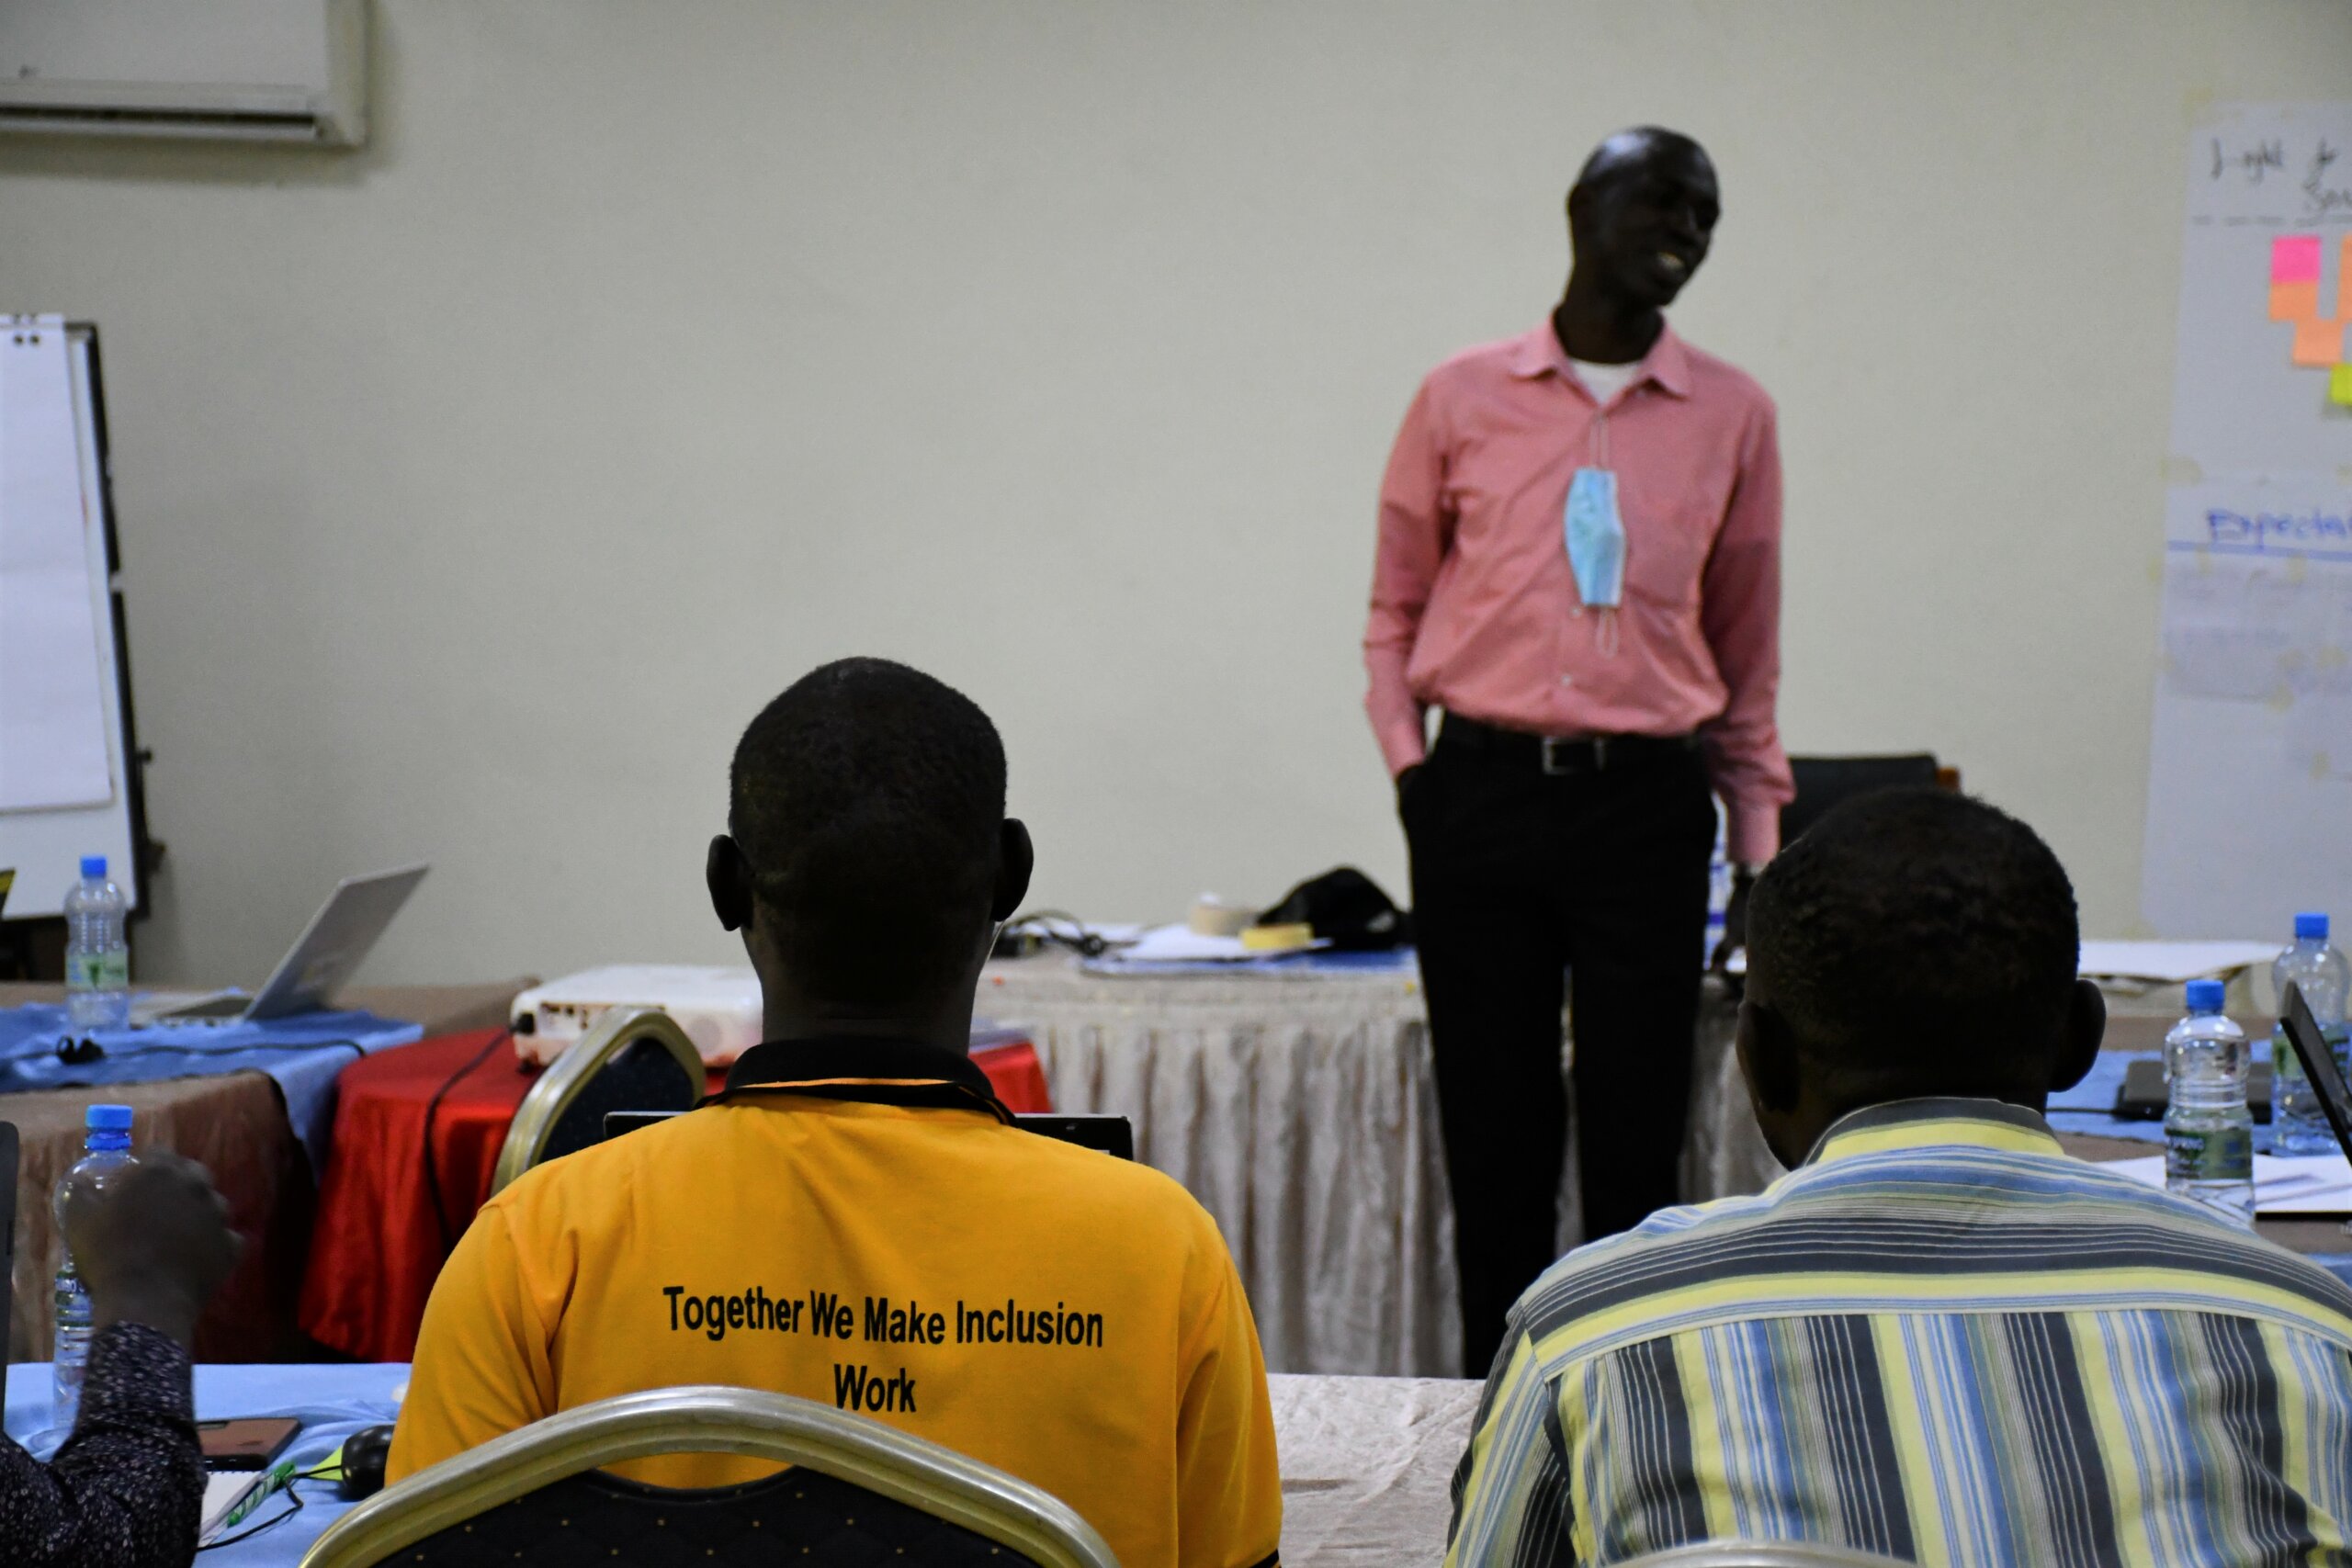 A South Sudan Advocacy Strategy Workshop with Edmund Yakani, a Human Rights Activist, the South Sudan Light for the World team, three DIFs from Juba and the Chair of the South Sudan Union of Persons with Disabilities took place in Juba in February 2022. These partnerships will be integral in the implementation of the CRPD. 